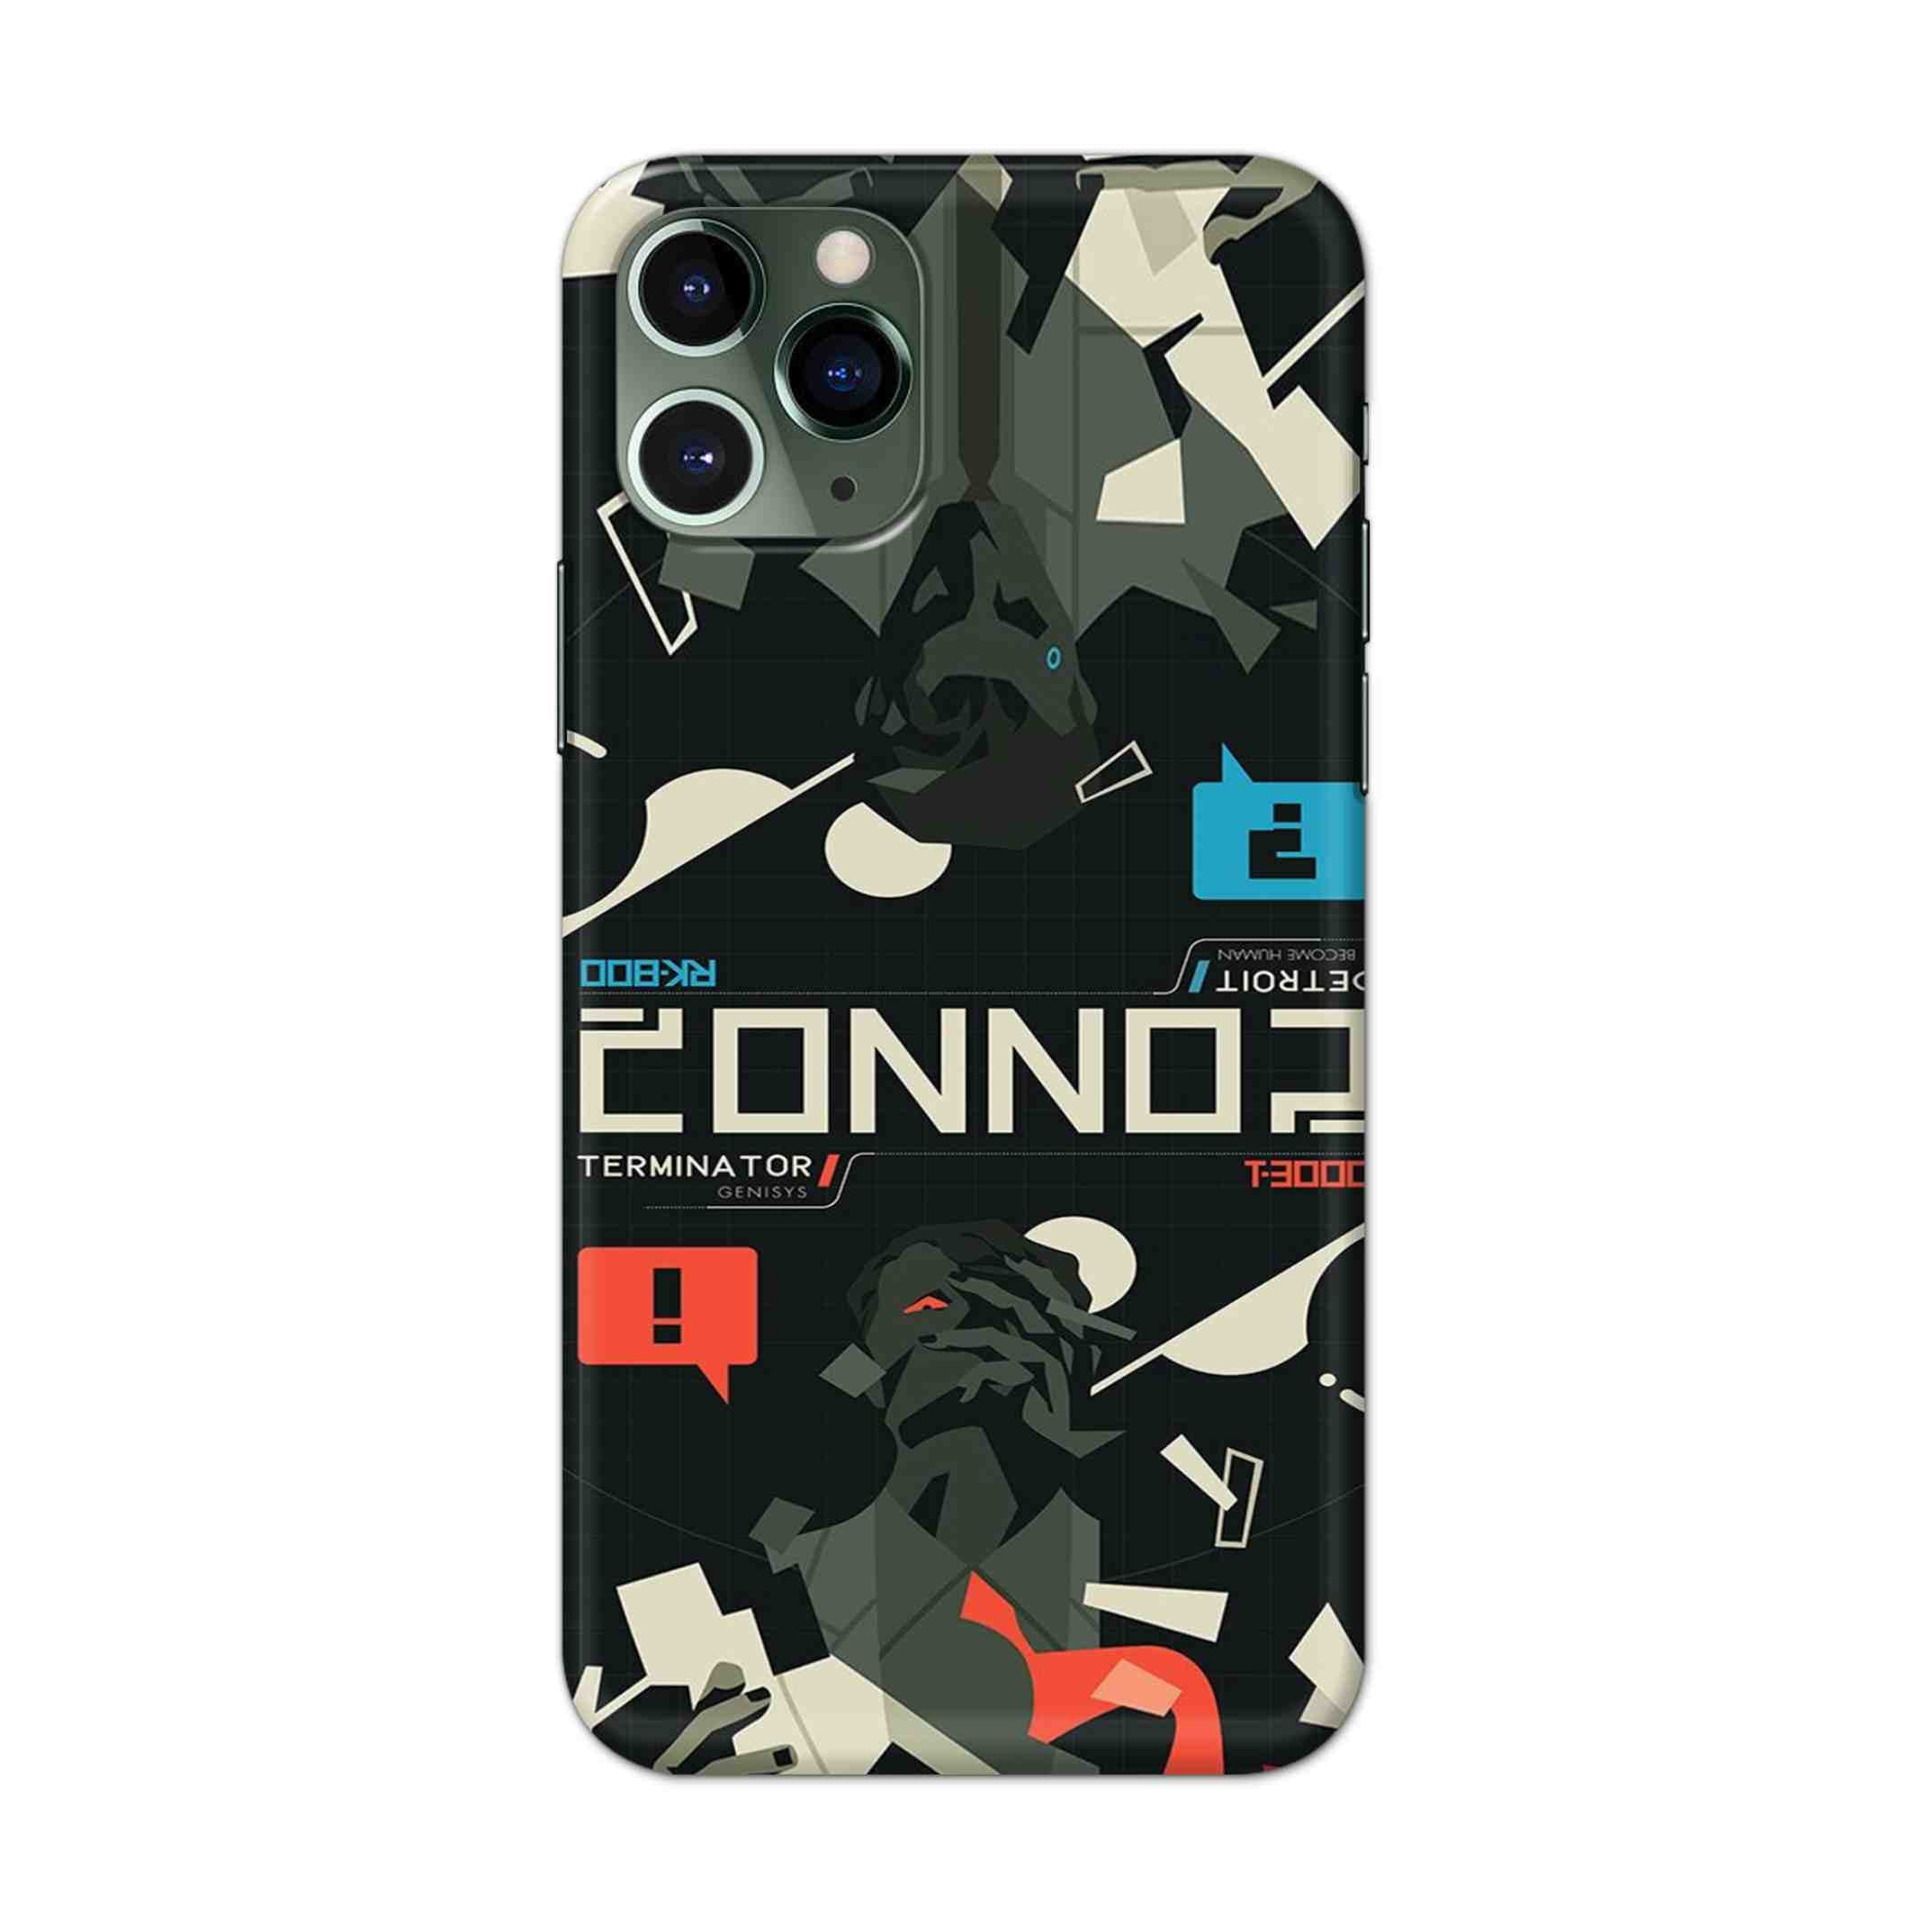 Buy Terminator Hard Back Mobile Phone Case/Cover For iPhone 11 Pro Online